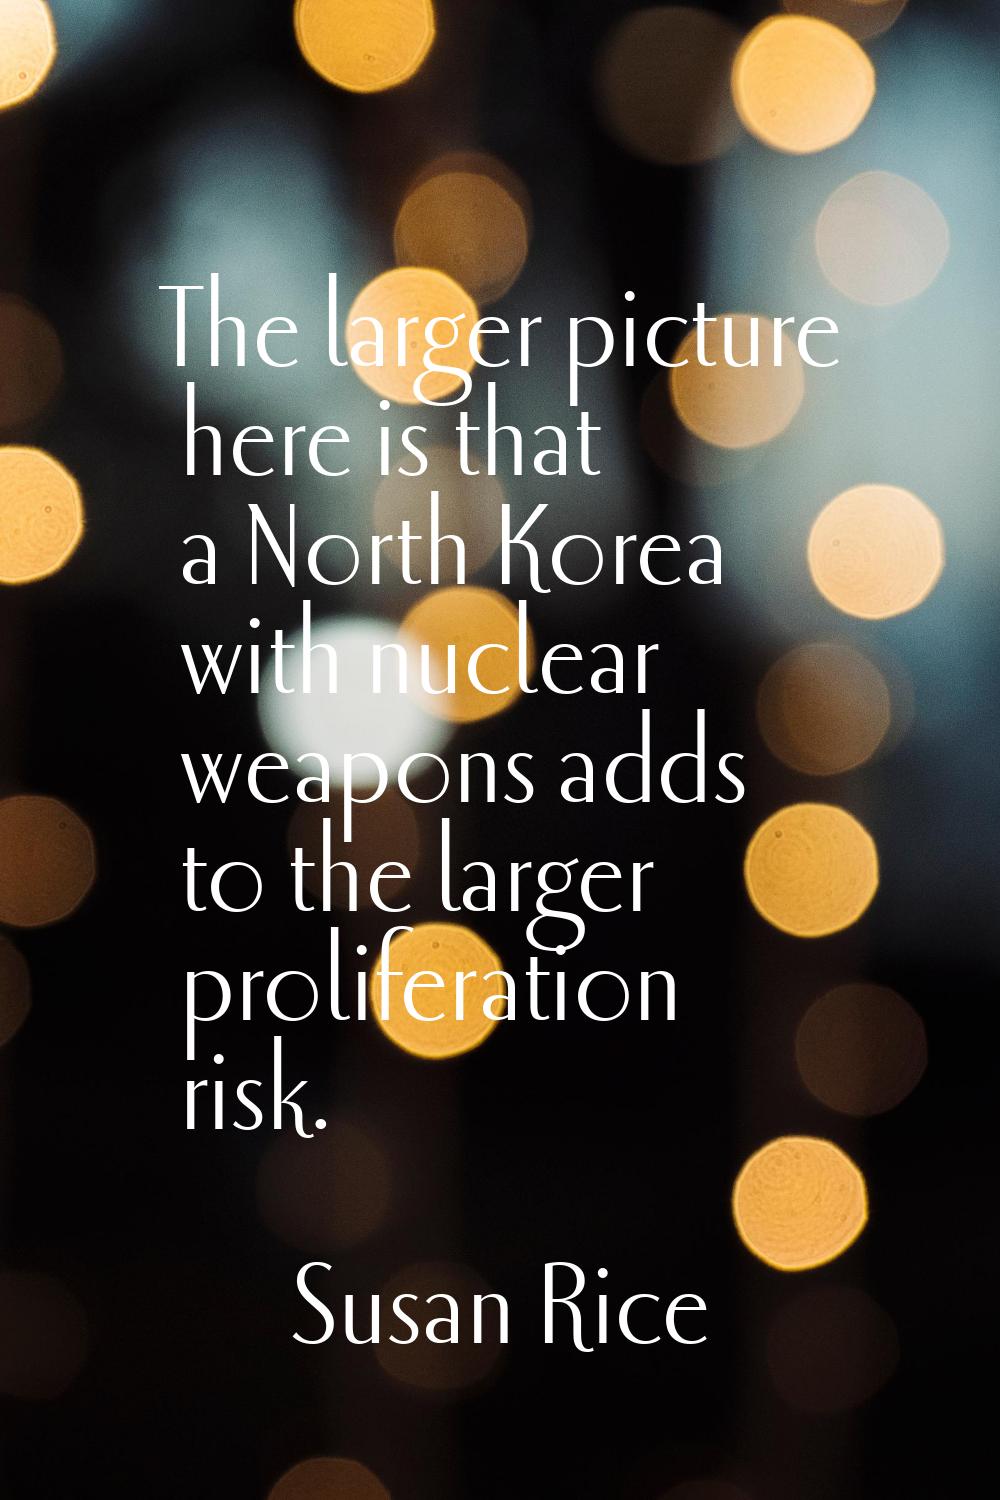 The larger picture here is that a North Korea with nuclear weapons adds to the larger proliferation